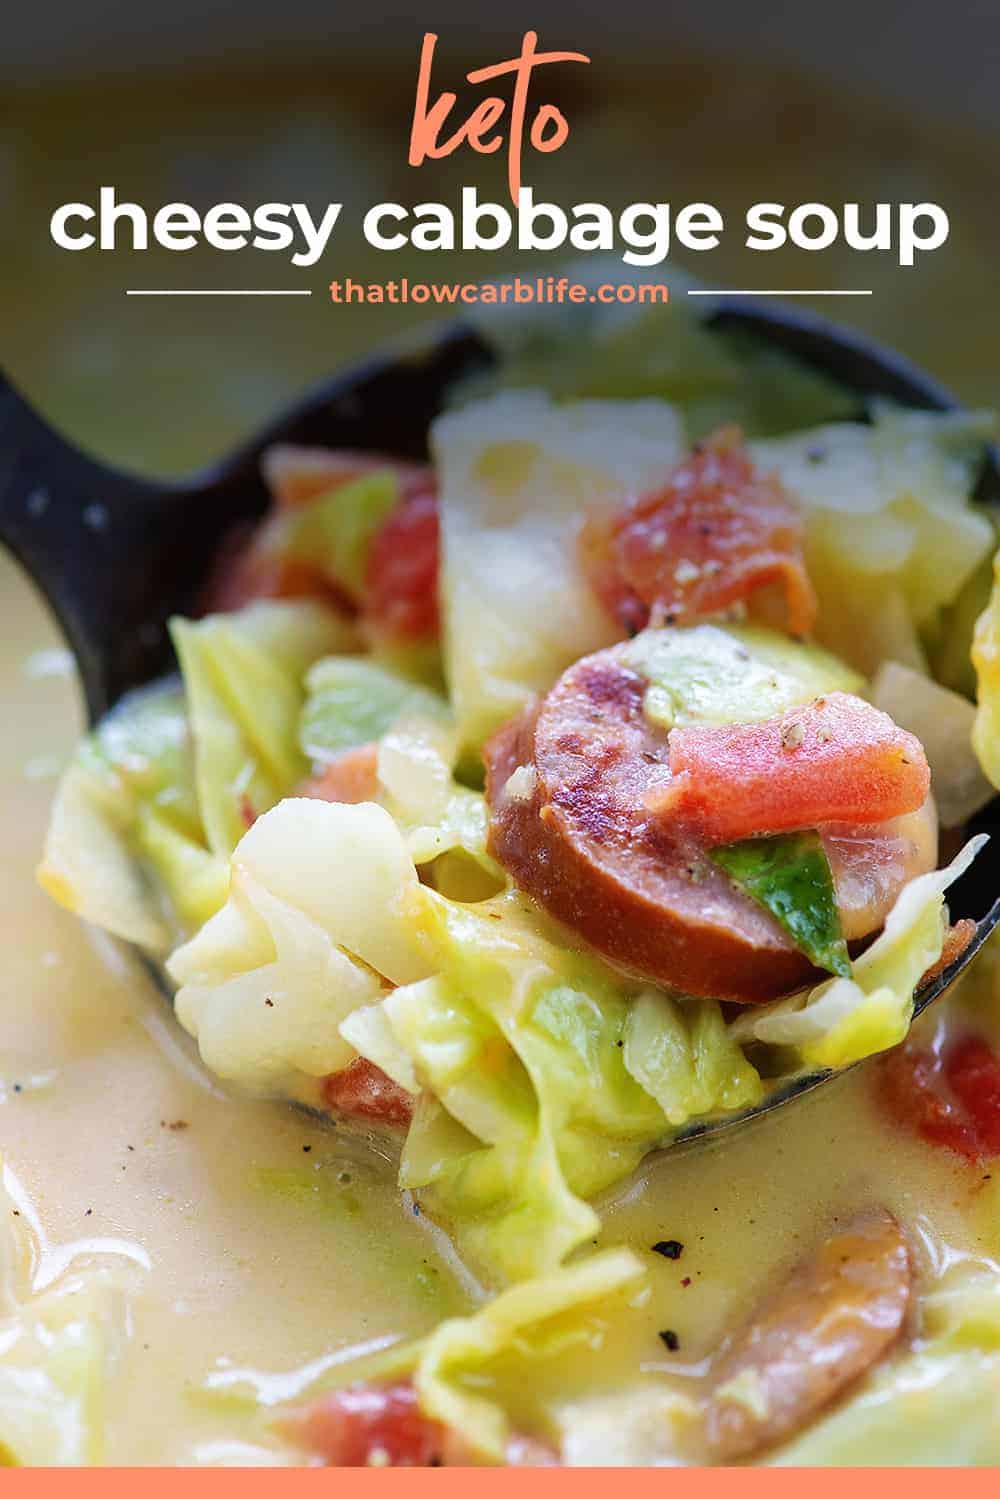 keto cabbage soup in ladle